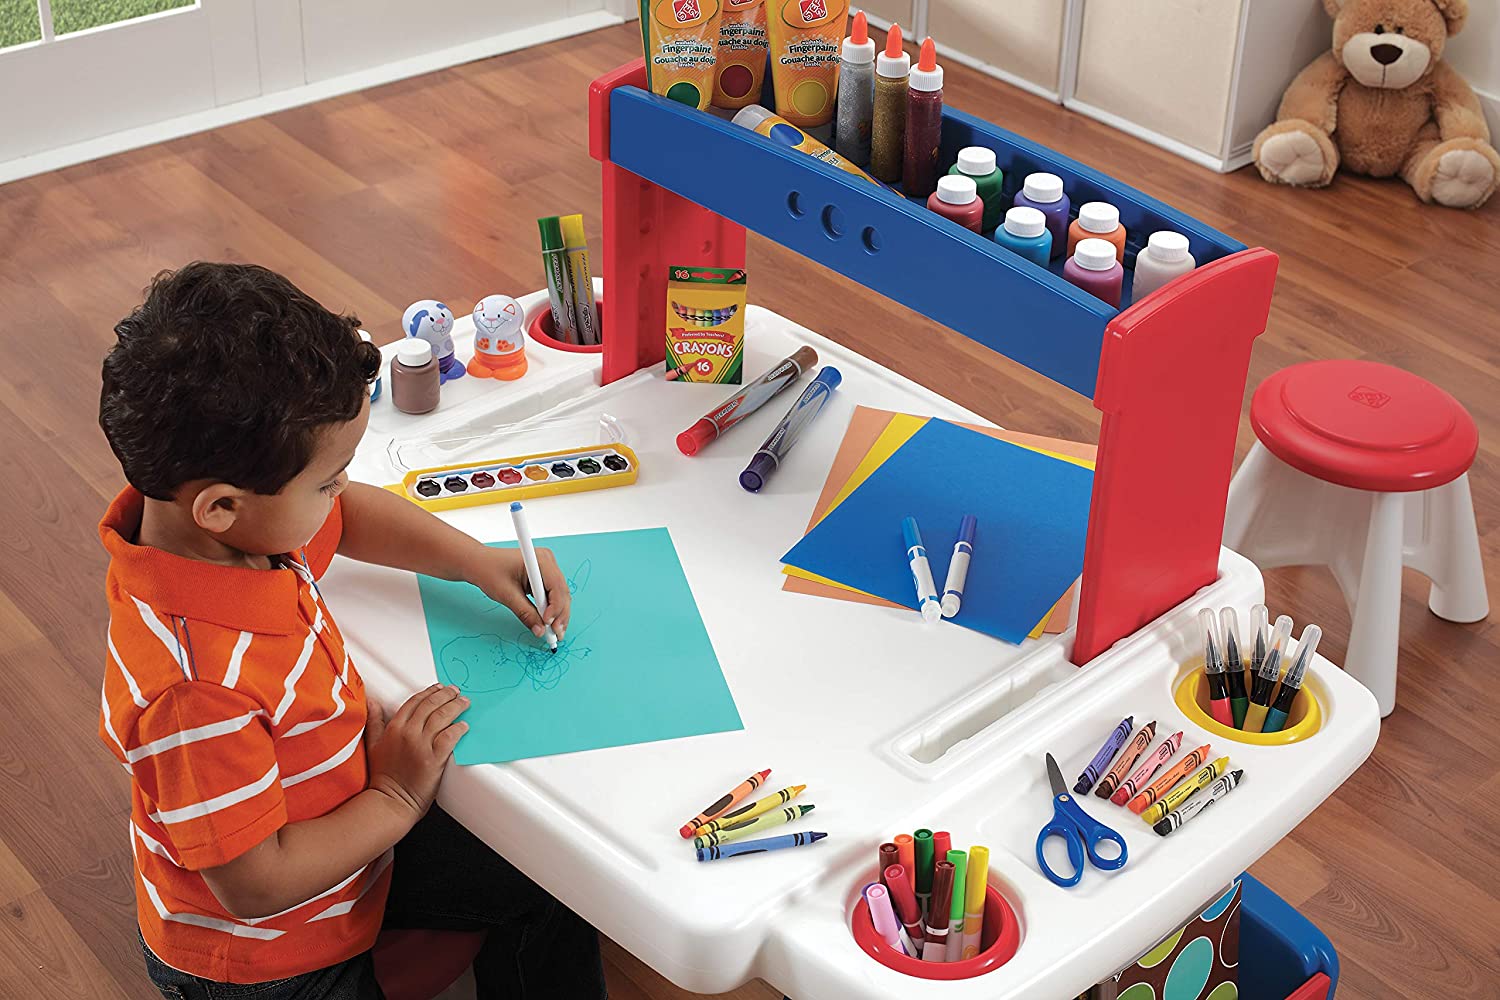 Step2 Creative Project Table with Stool Play & School Furniture for Kids